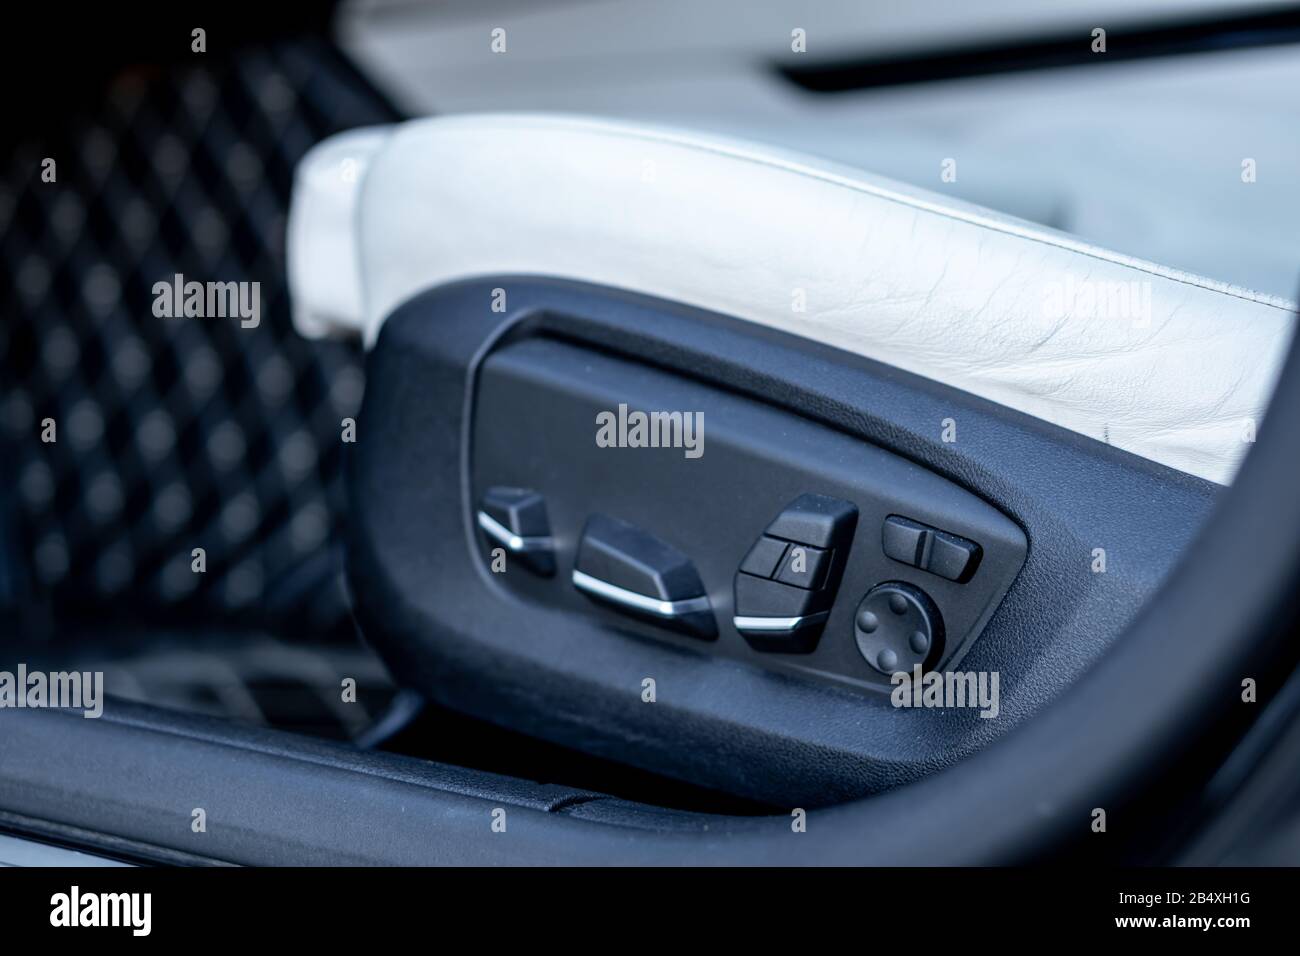 Beautiful german car luxurious interior with white leather, black trim ornaments, heated and ventilated seats, harman kardon sound system, individual Stock Photo